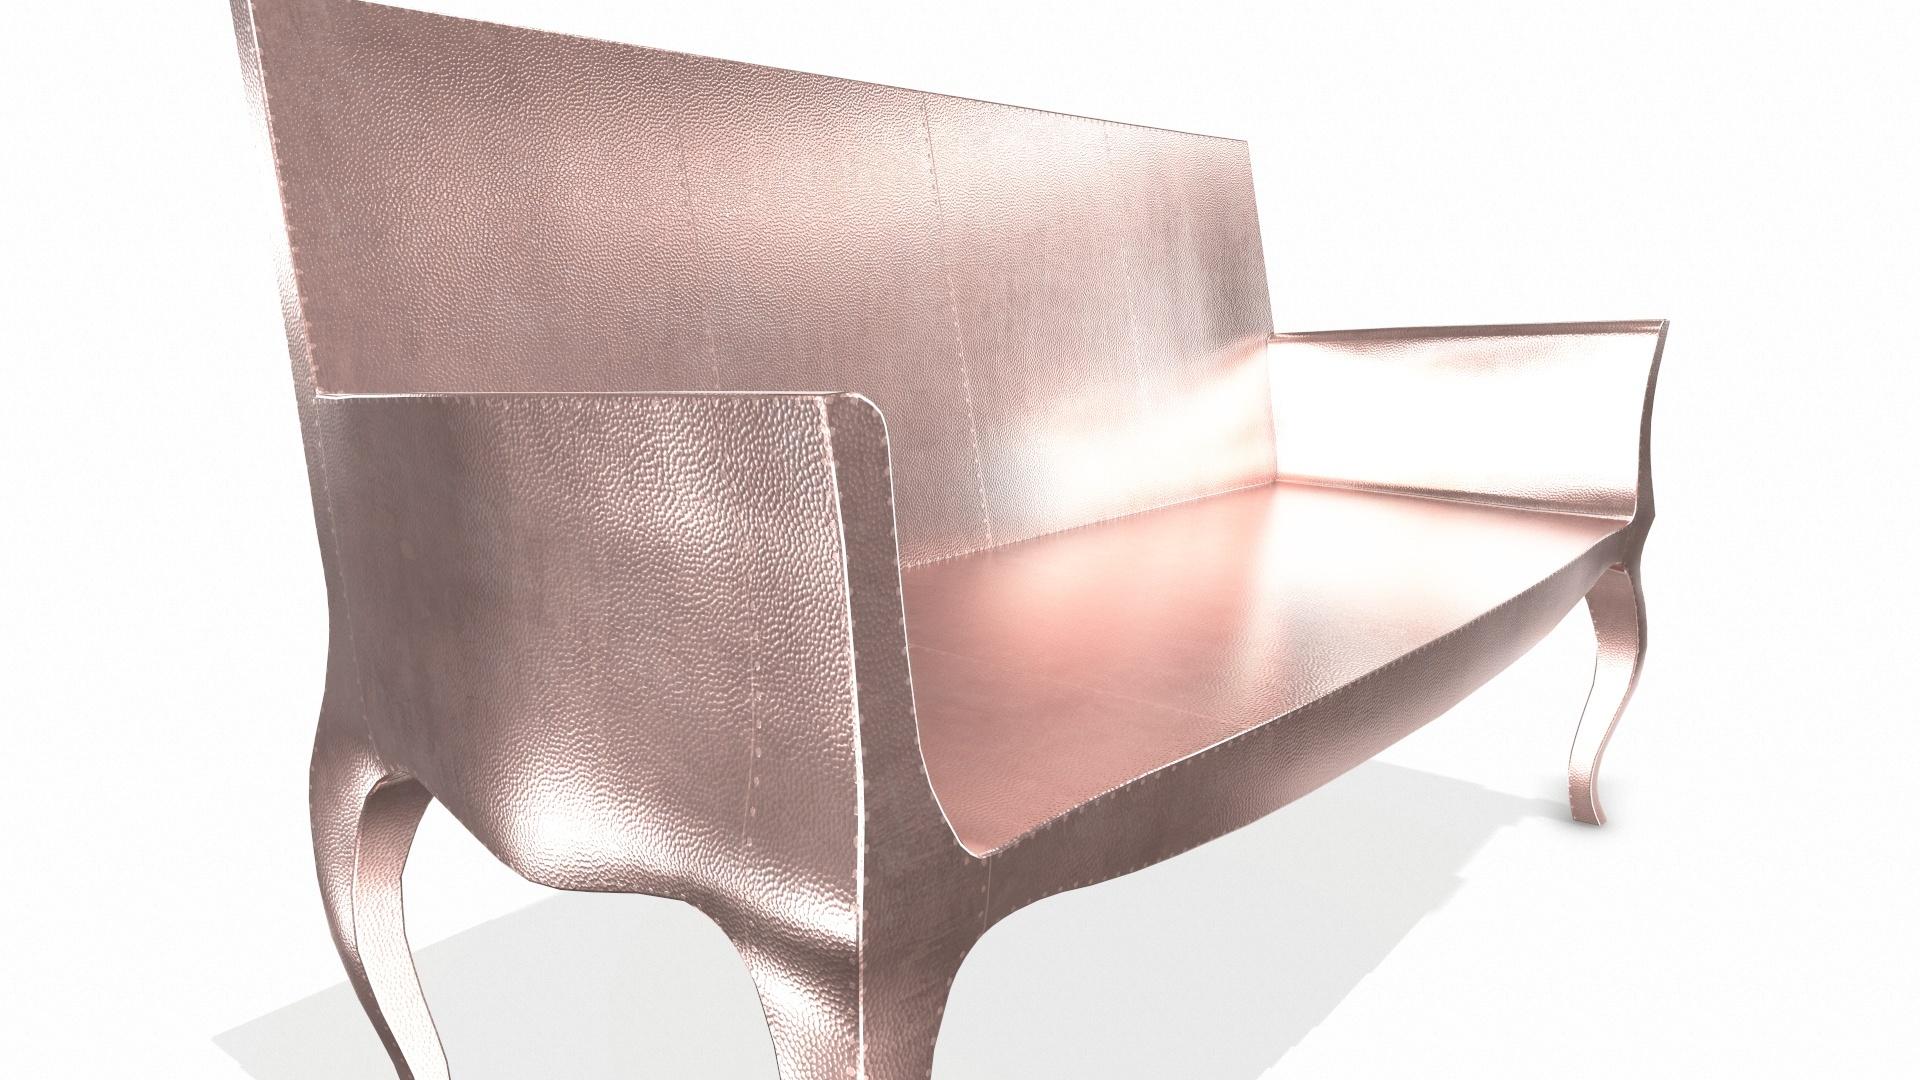 Metal Louise Settee Art Deco Daybeds in Mid. Hammered Copper by Paul Mathieu For Sale